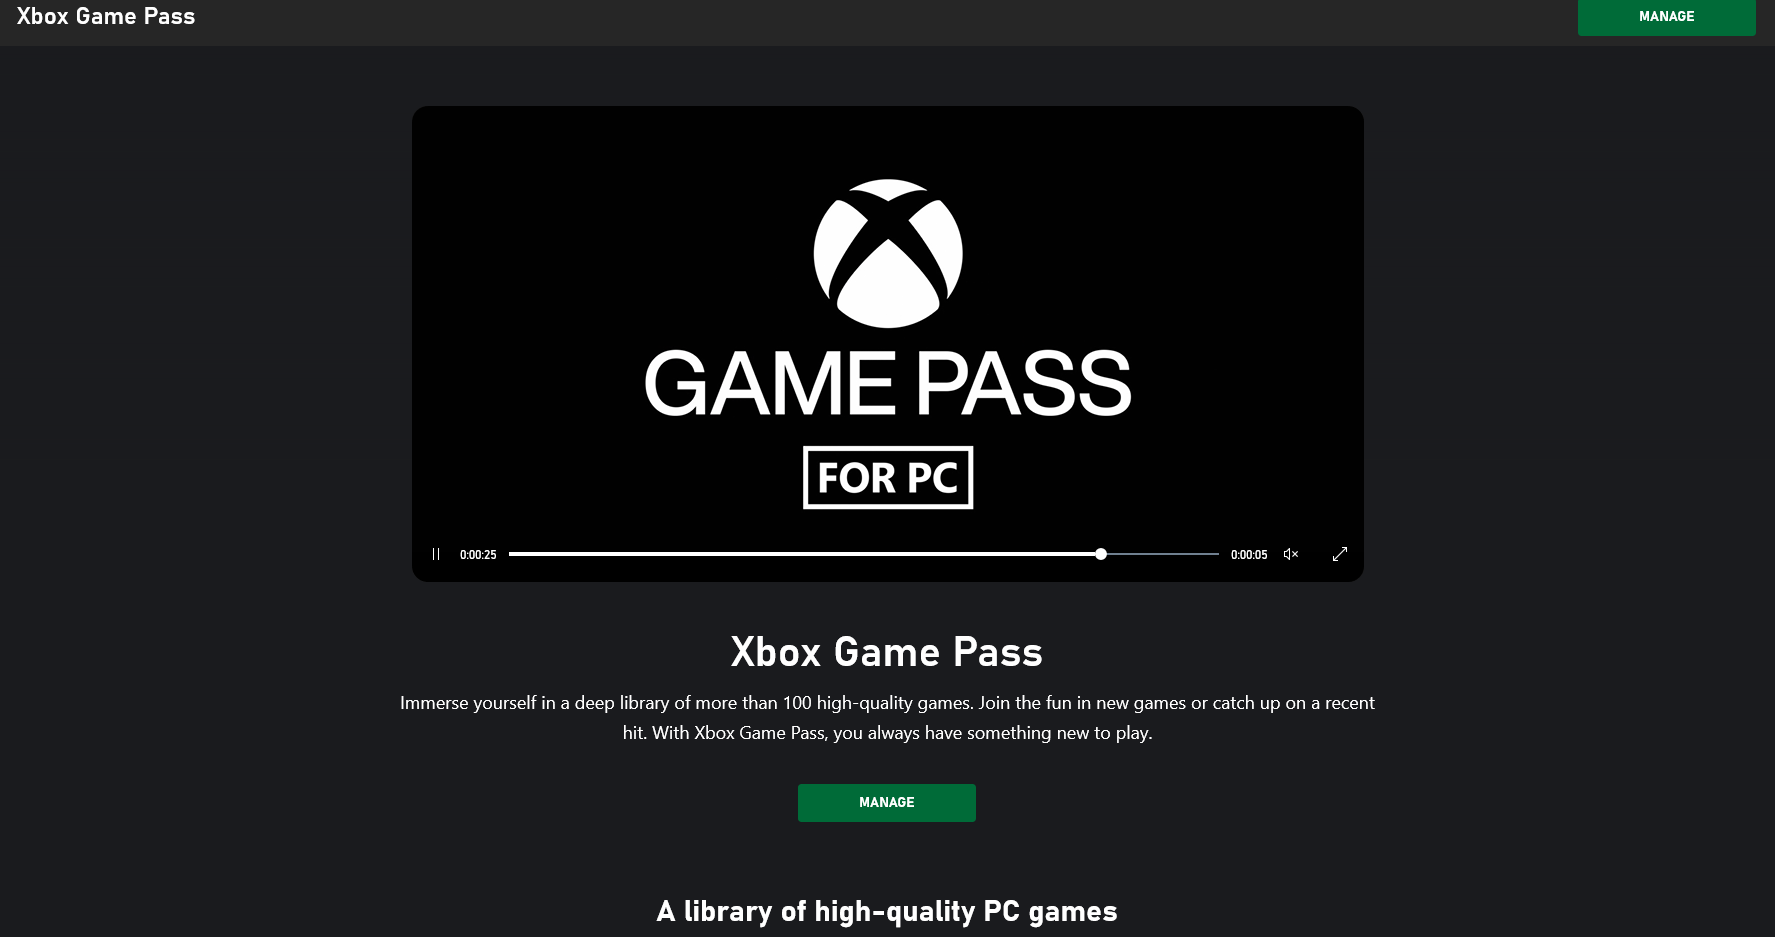 Can't access Back 4 Blood on Gamepass although it has already been -  Microsoft Community